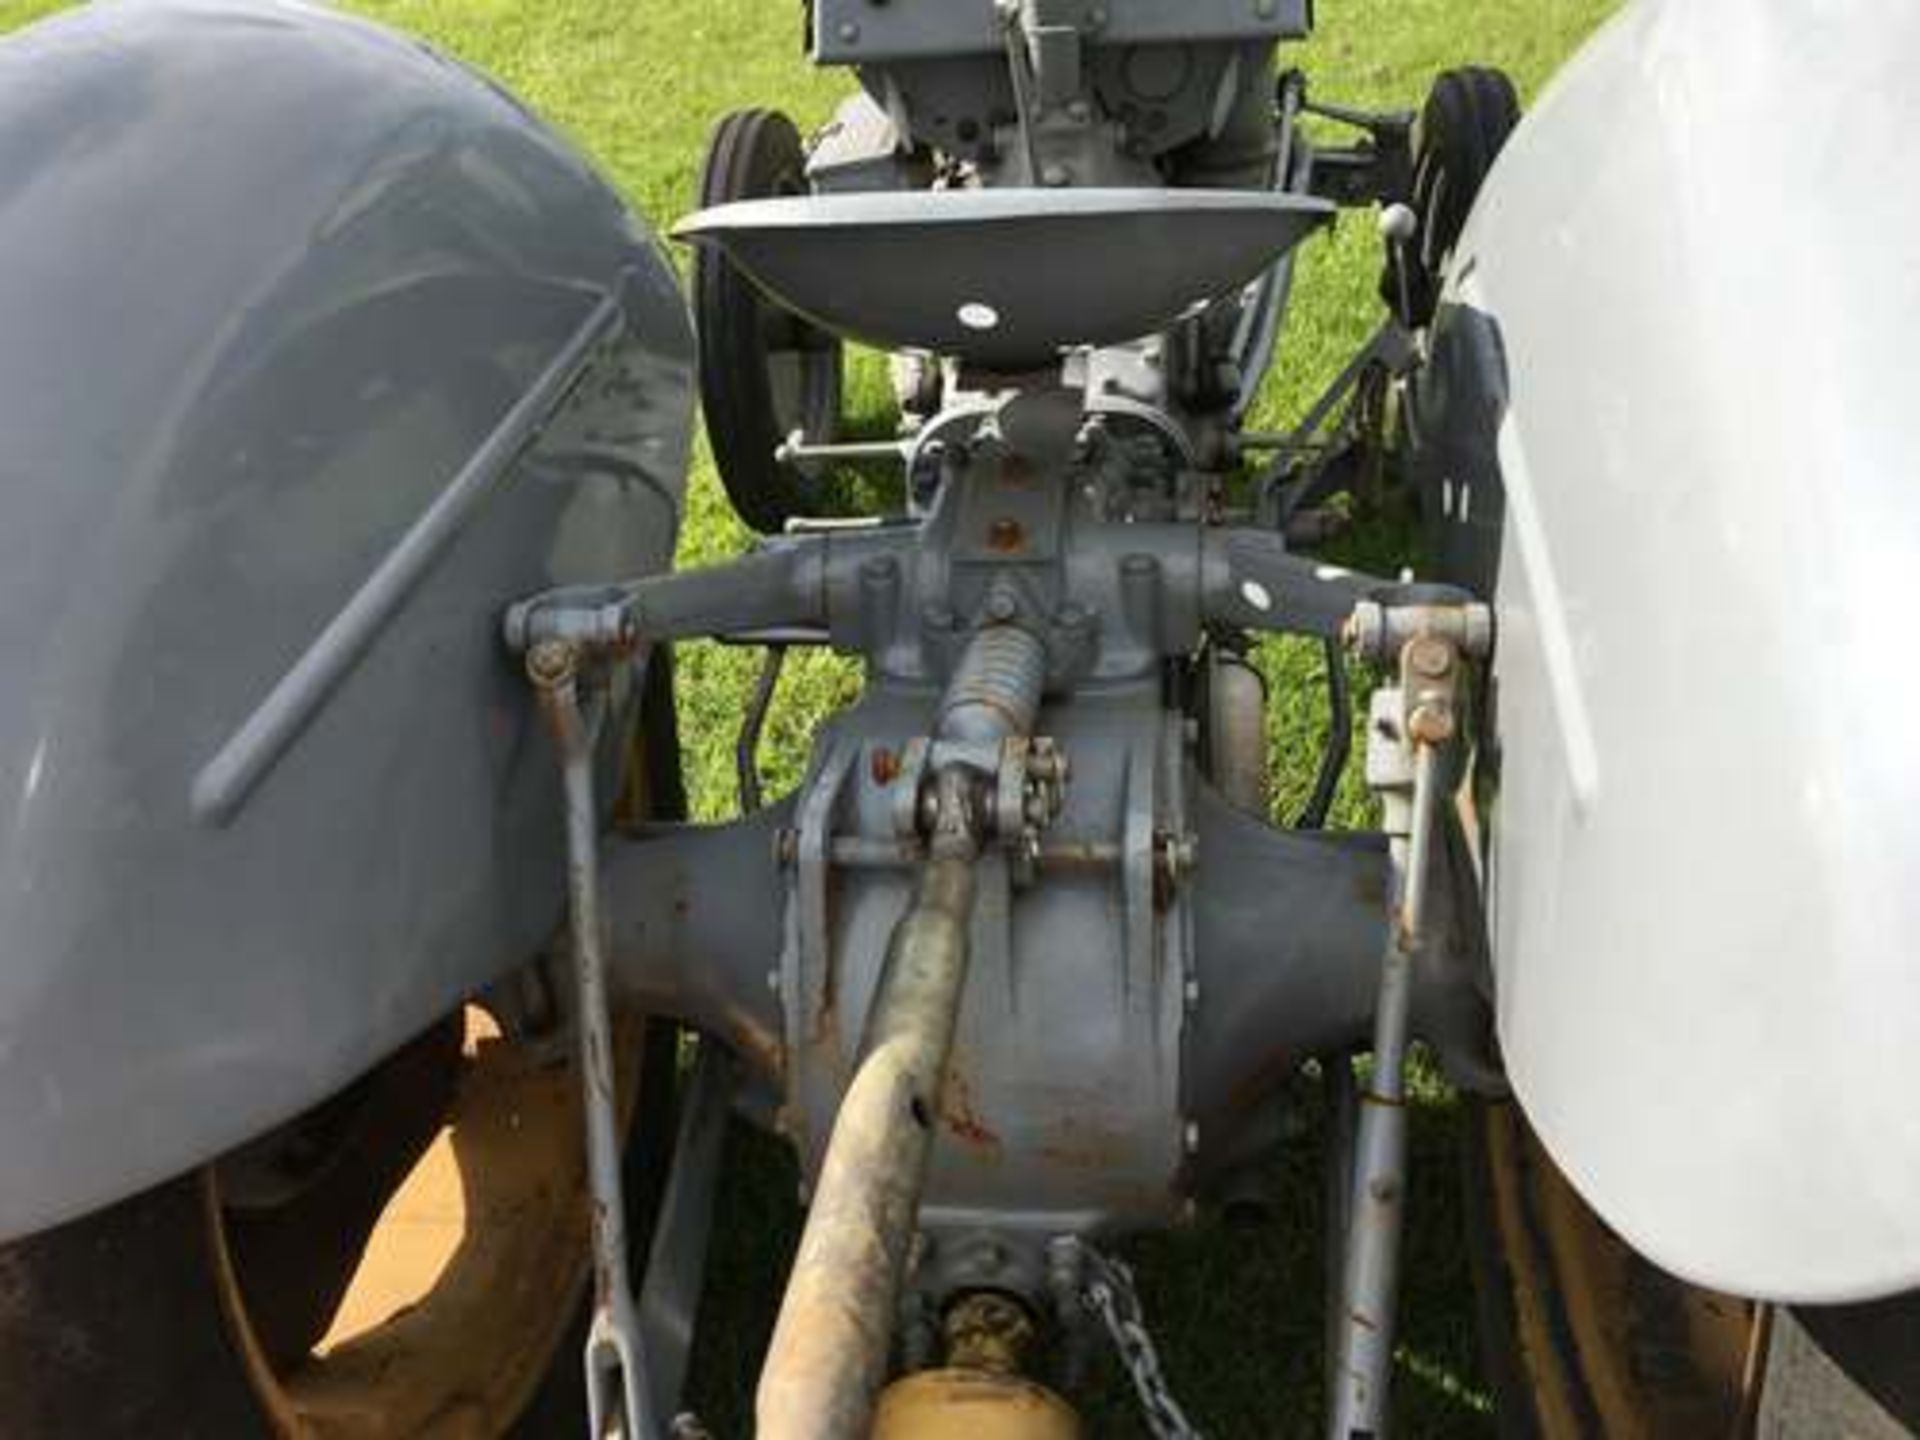 Ferguson TEC-20 Narrow Petrol Tractor With Operational Grass Cutter 1952 - Serial Number - TEC292678 - Image 7 of 13